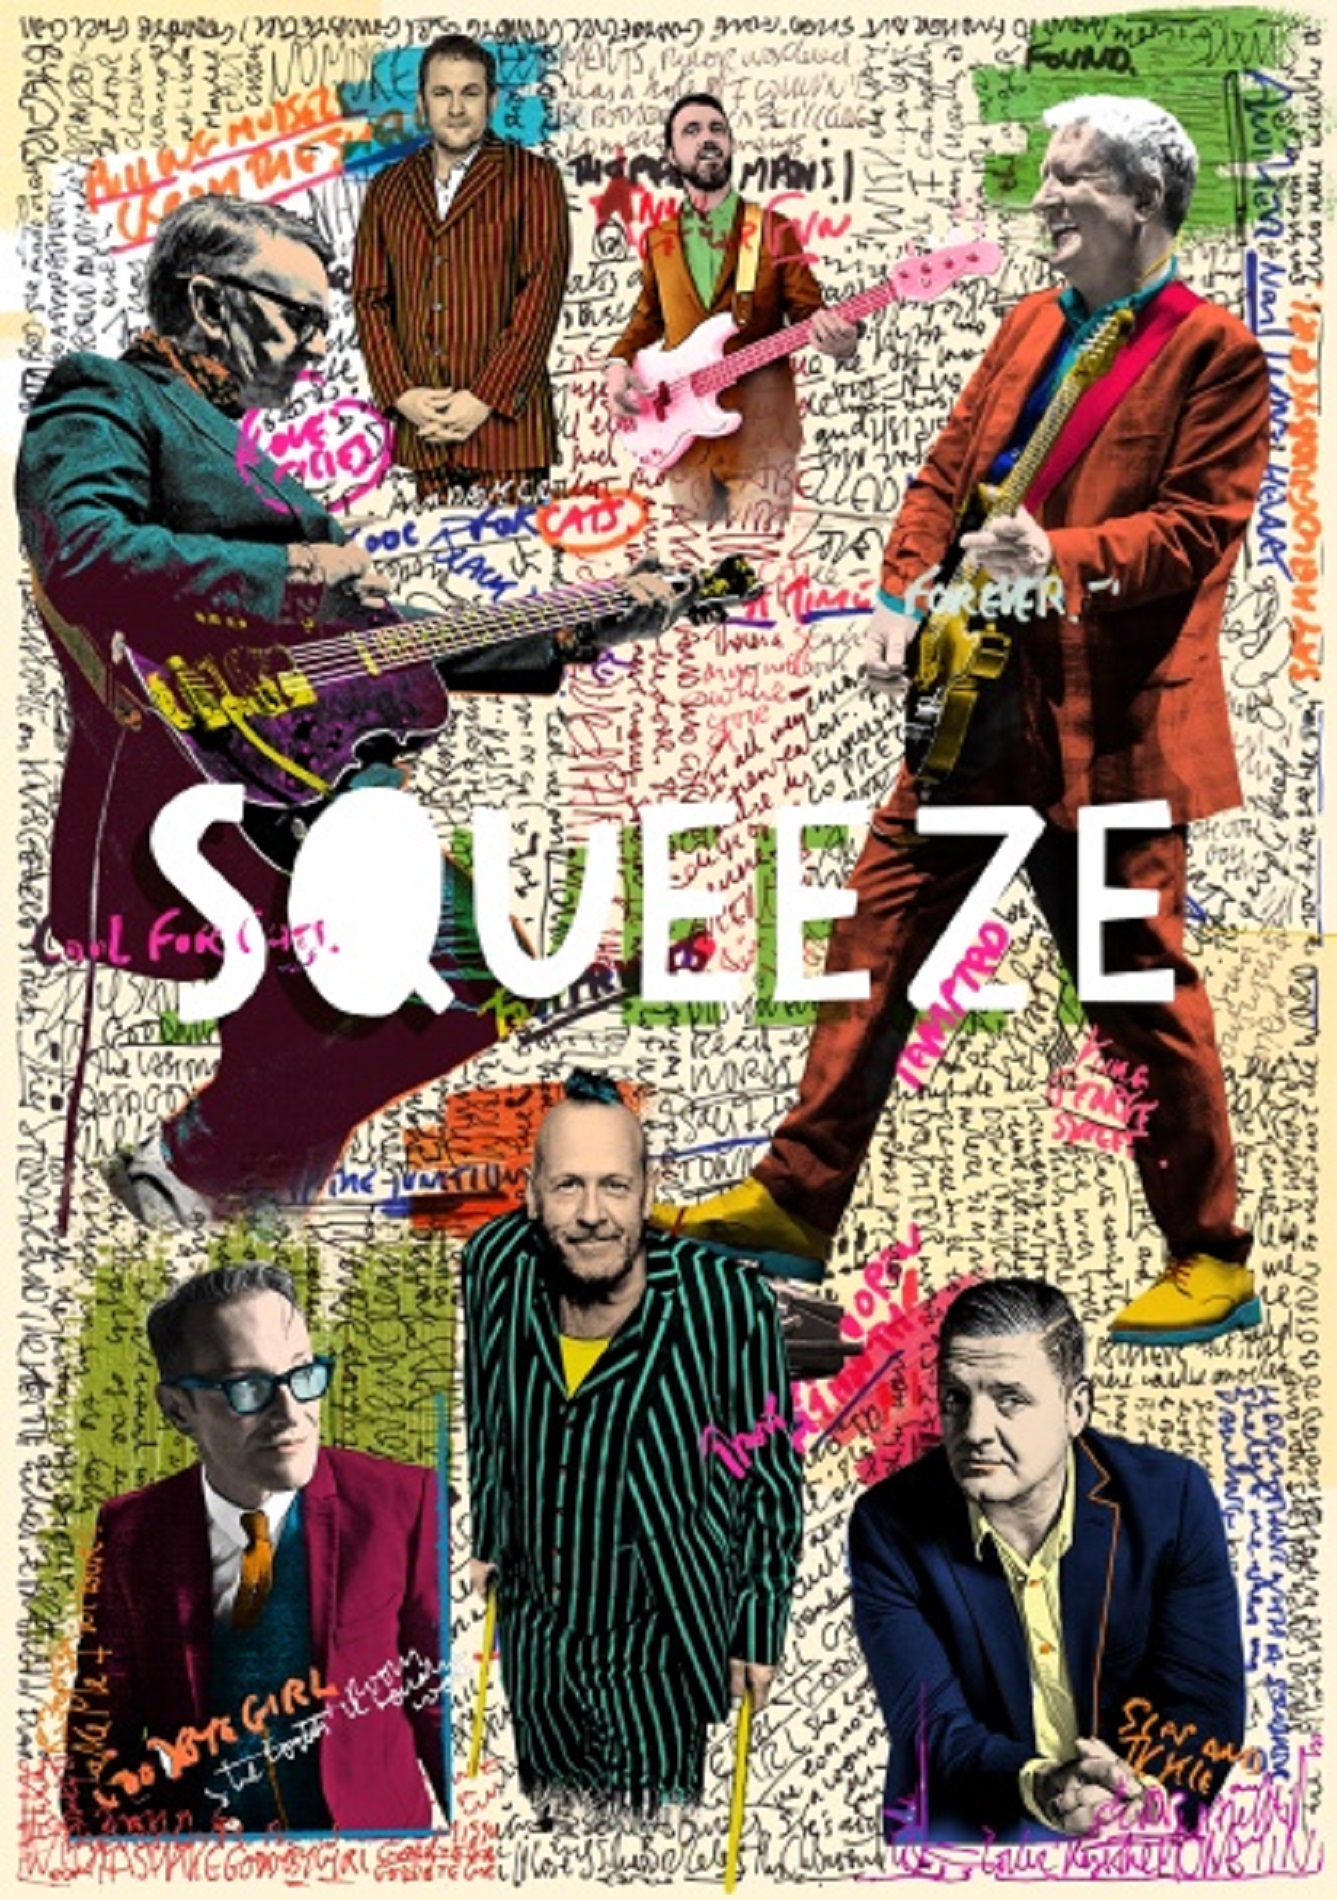 SQUEEZE IS COMING! NOMADBAND Tour Set To Cross The U.S.